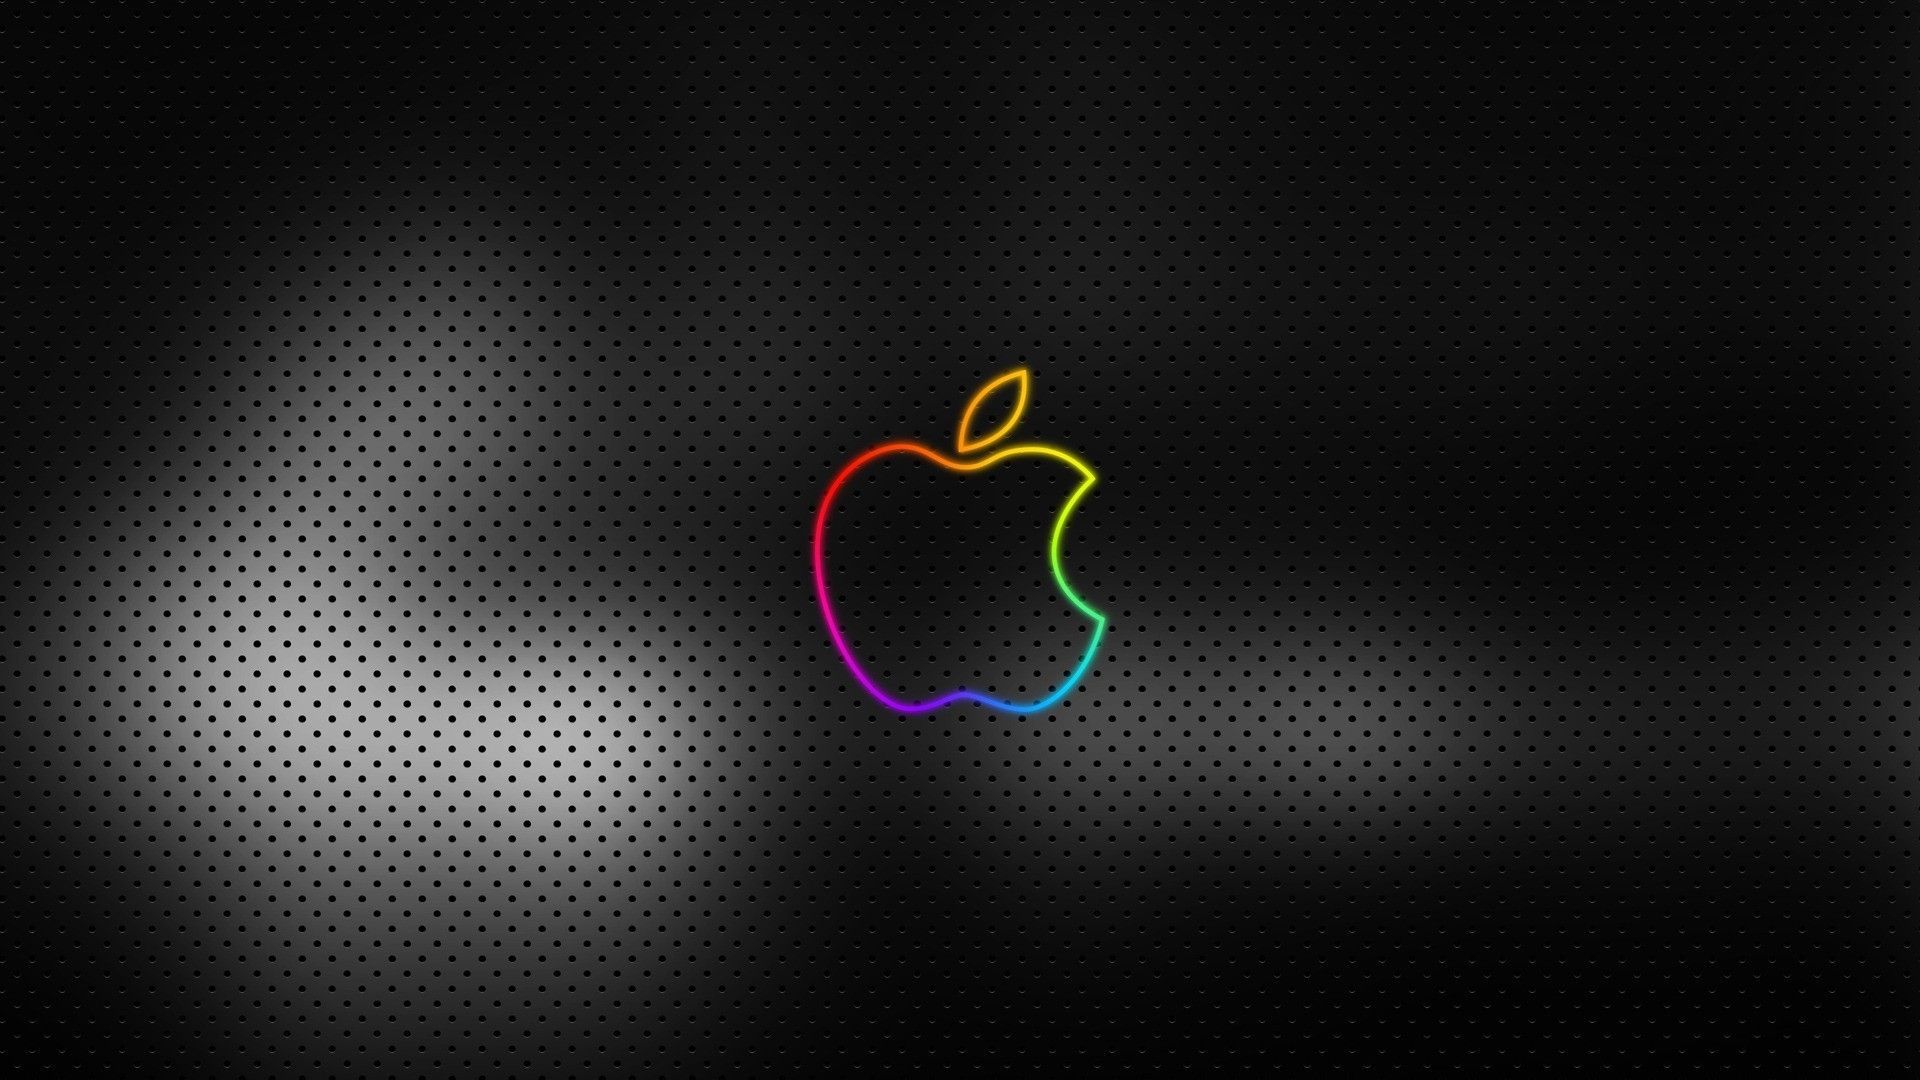 Download Wallpaper 1920x1080 Apple, Mac, Background, Dots, Colored ...